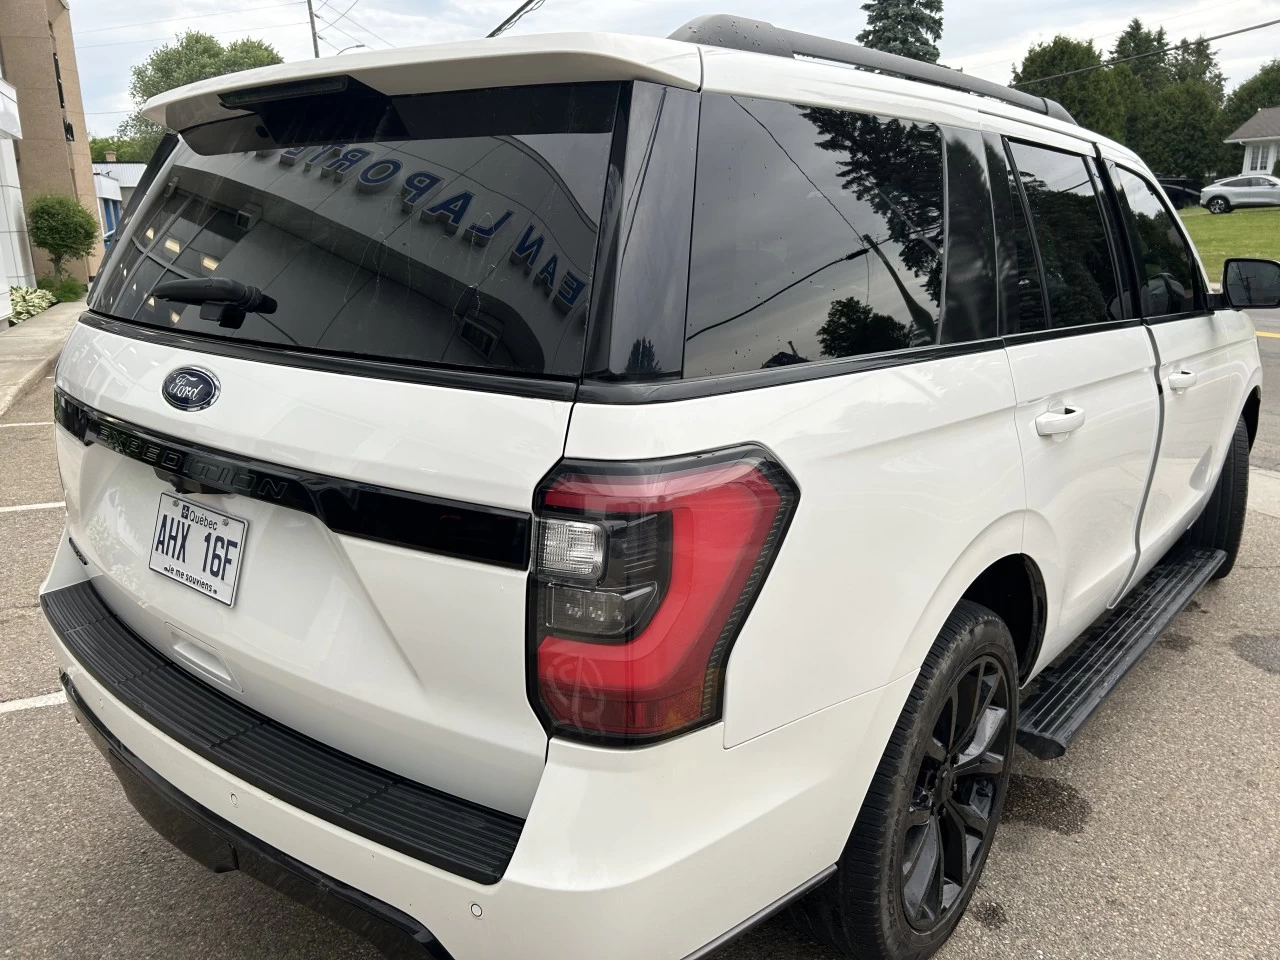 2021 Ford Expedition Limited Main Image